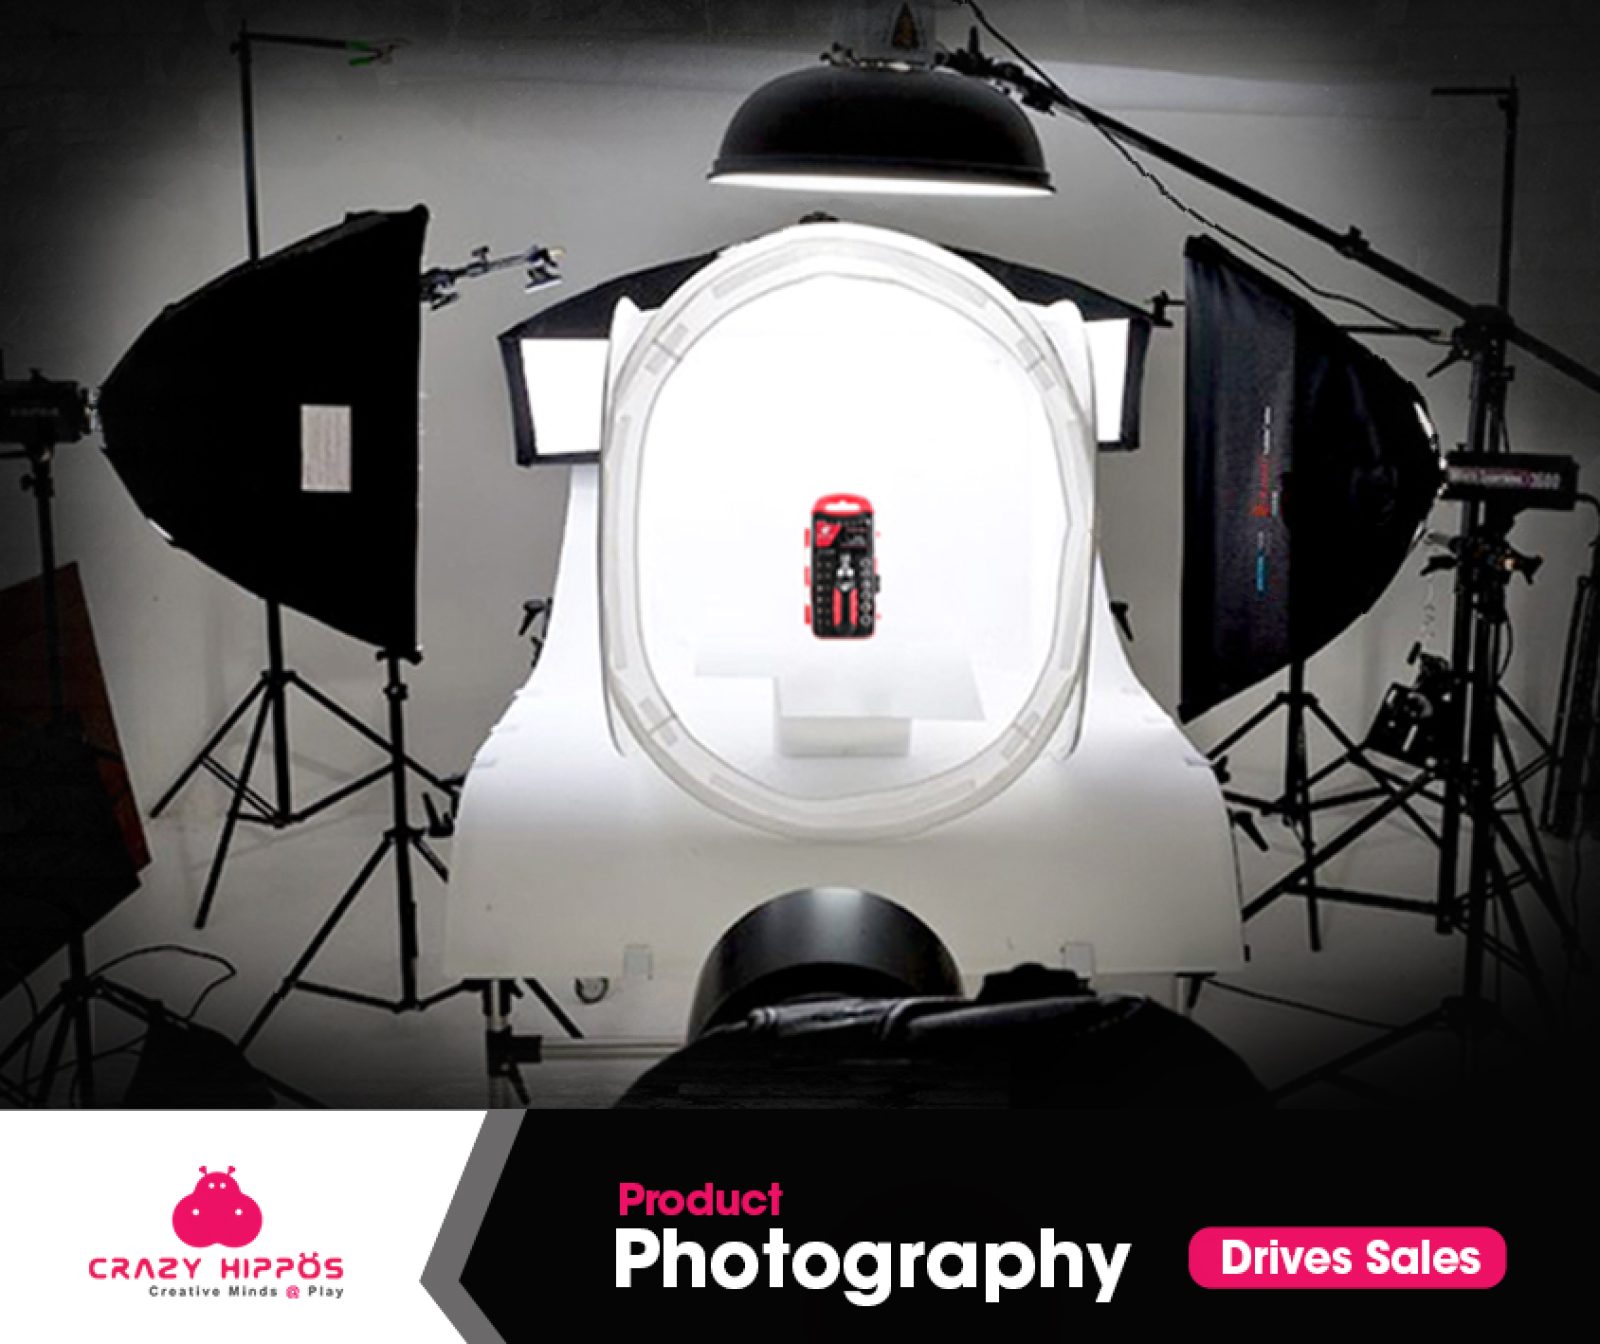 3 REASONS HOW PRODUCT PHOTOGRAPHY WILL BOOST YOUR SALES